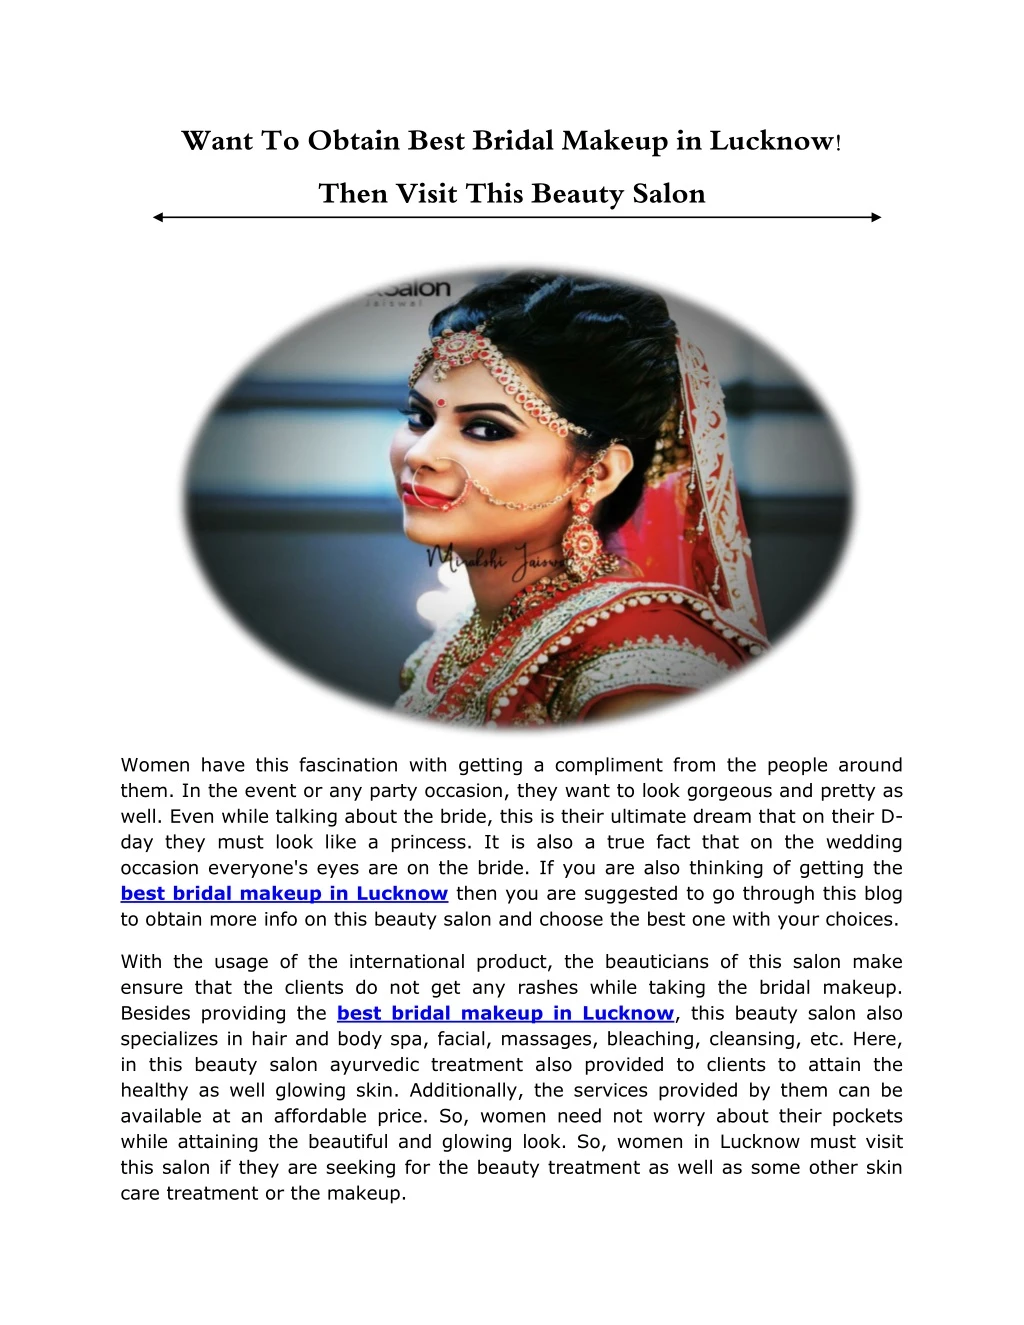 want to obtain best bridal makeup in lucknow then